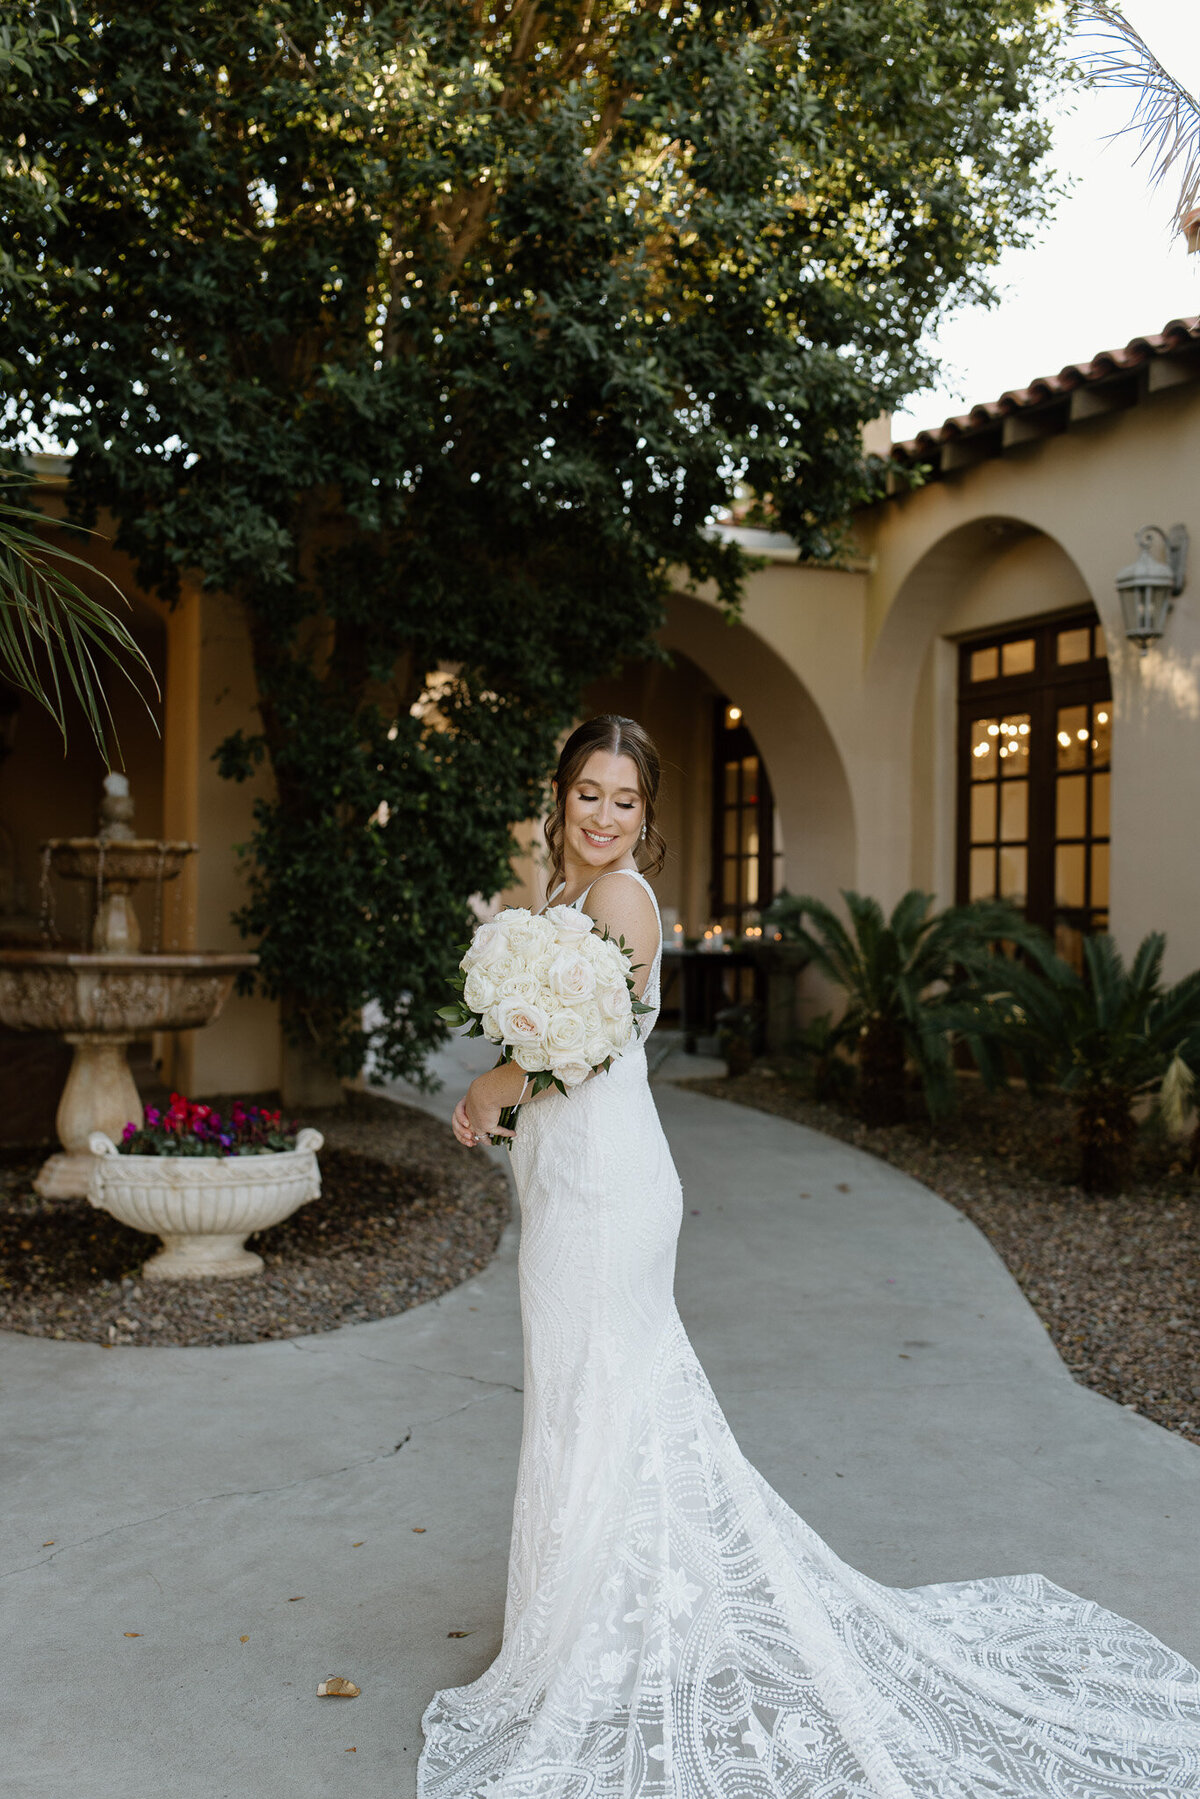 Arizona Wedding and Elopement Photographer - Candid Moments and Details - The Secret Garden in Phoenix